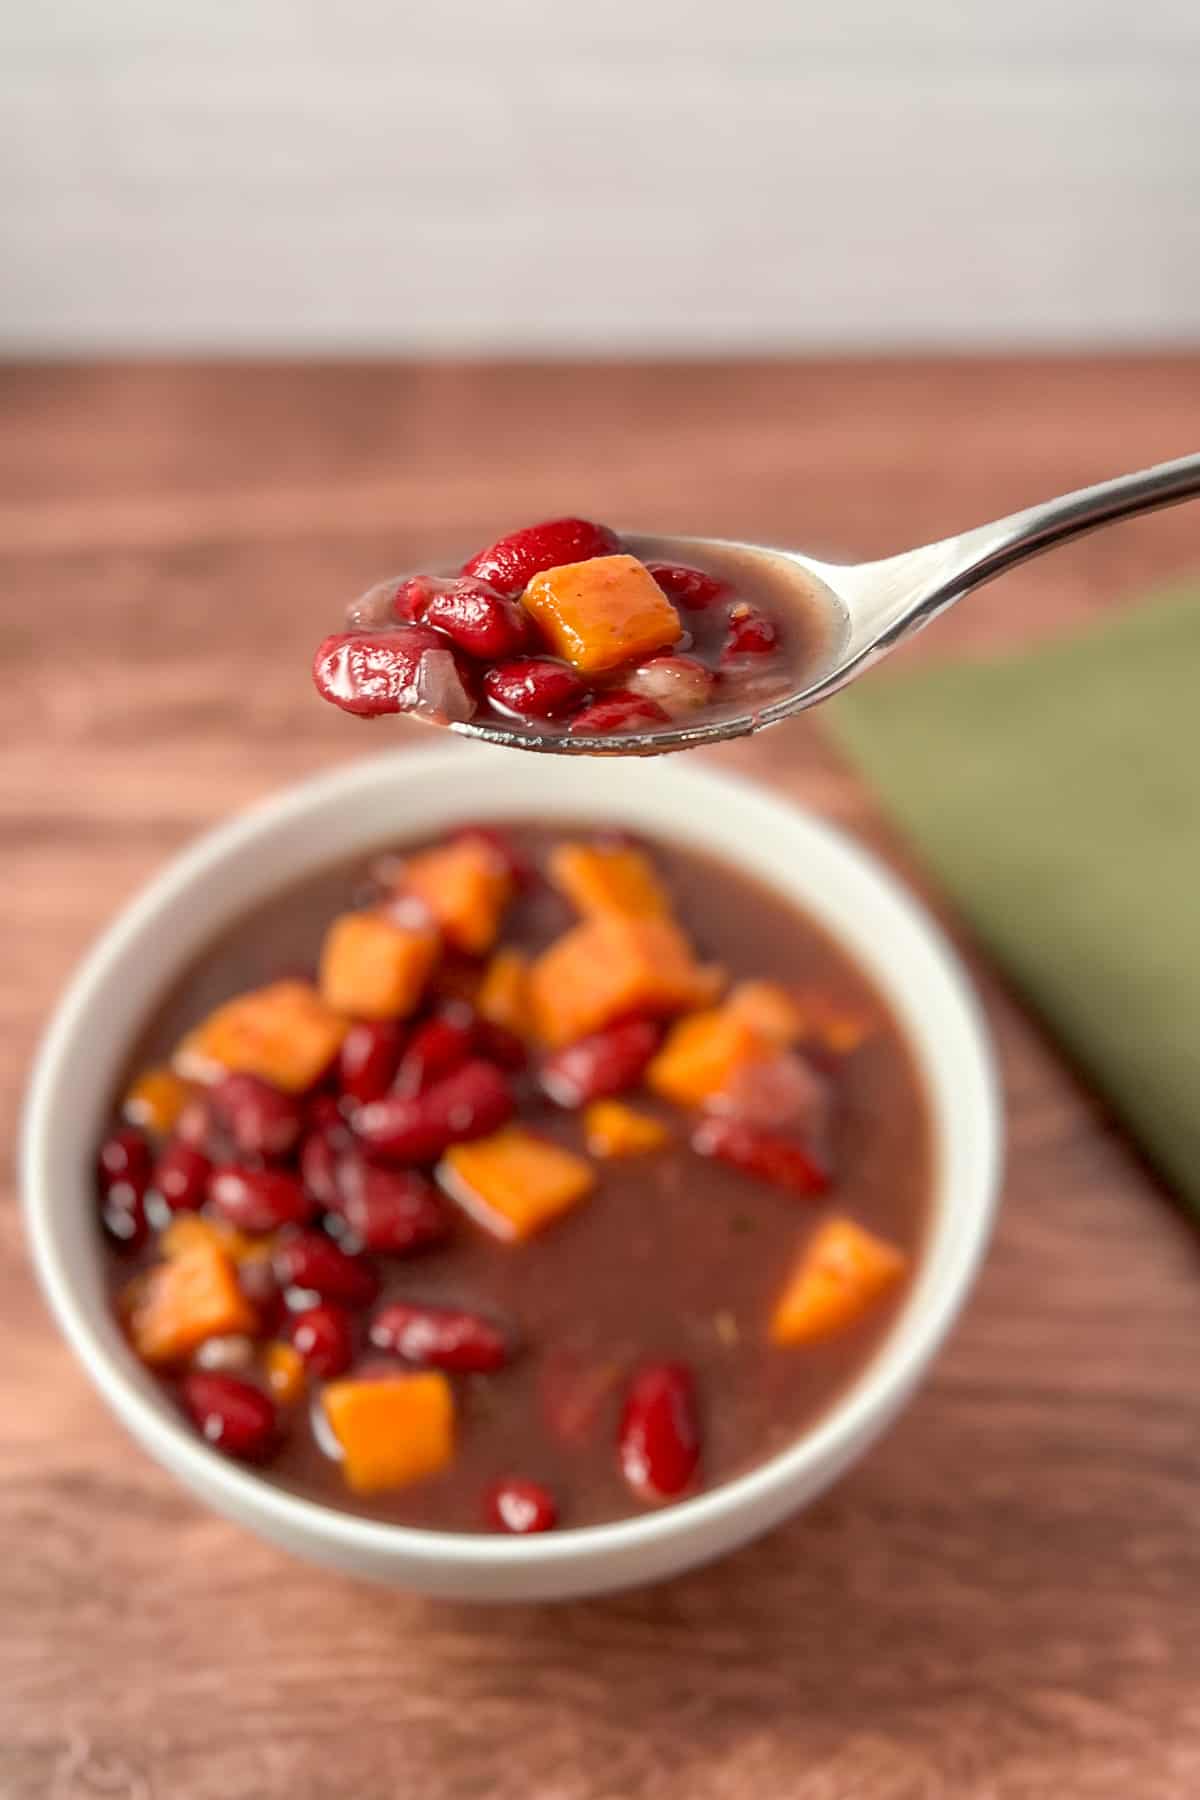 a spoon lifted with bean soup; bowl of kidney bean soup blurred in the background